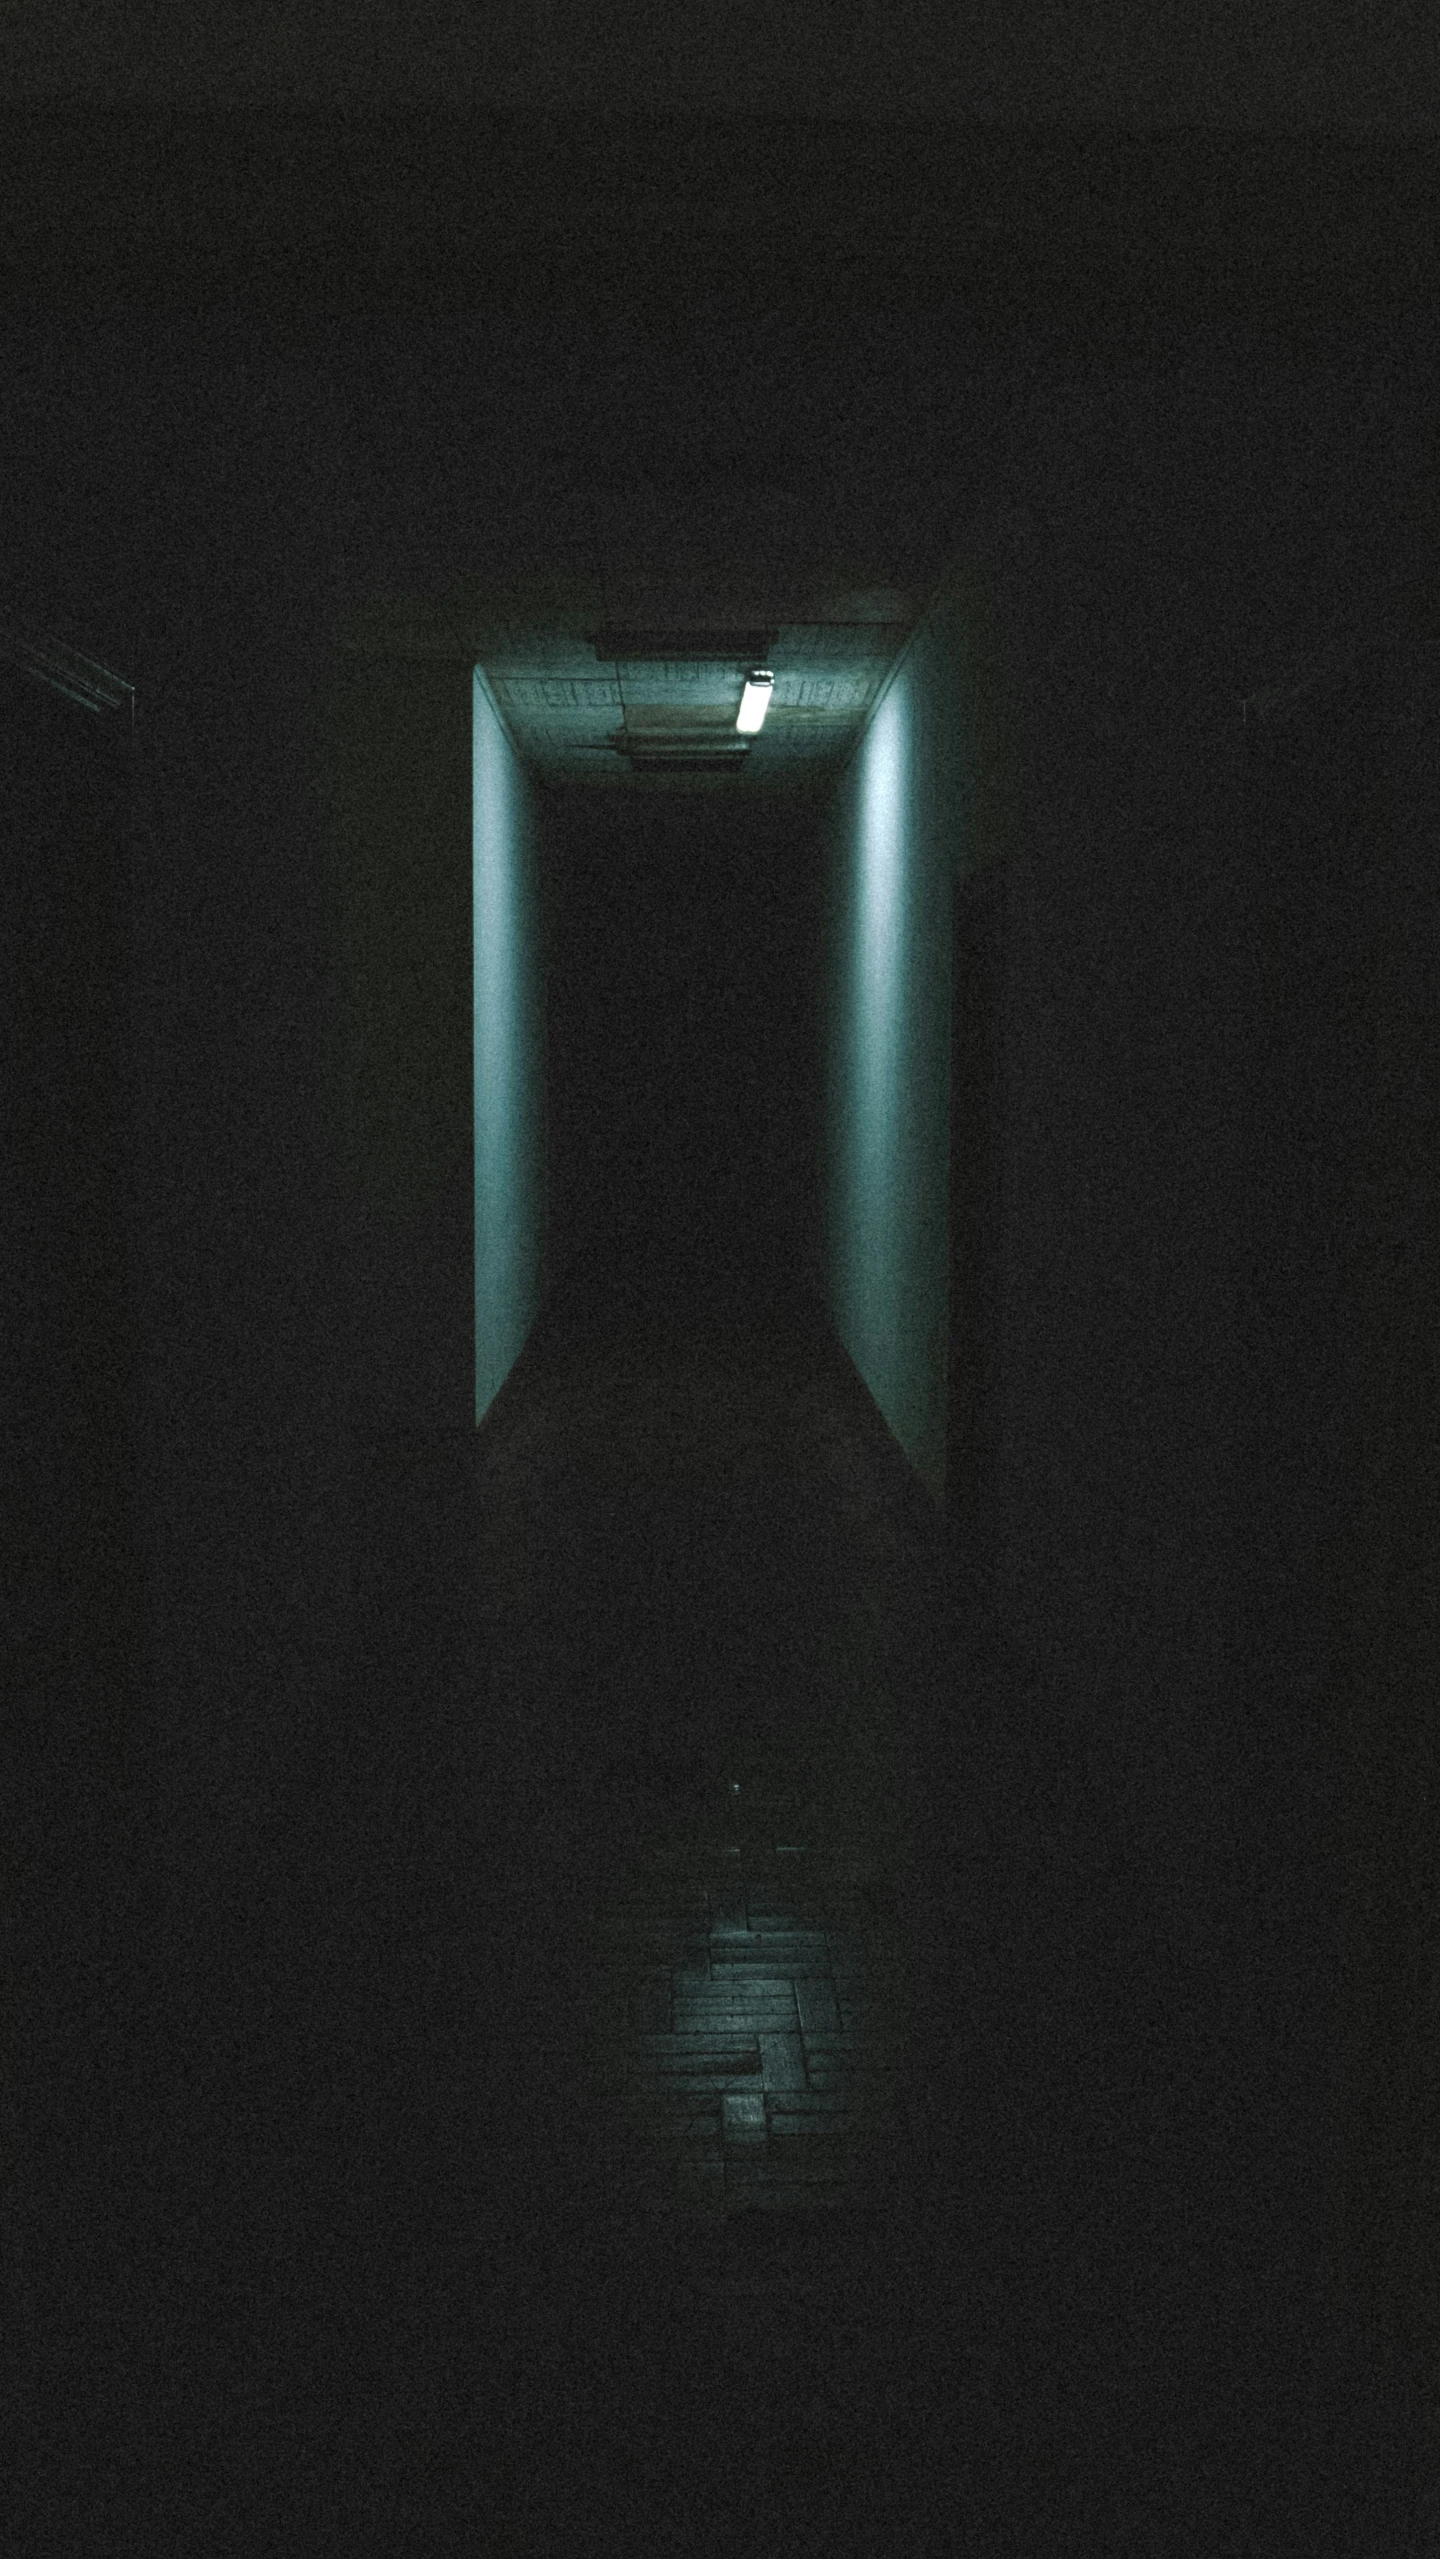 there is an empty dark tunnel that appears to be lit at night